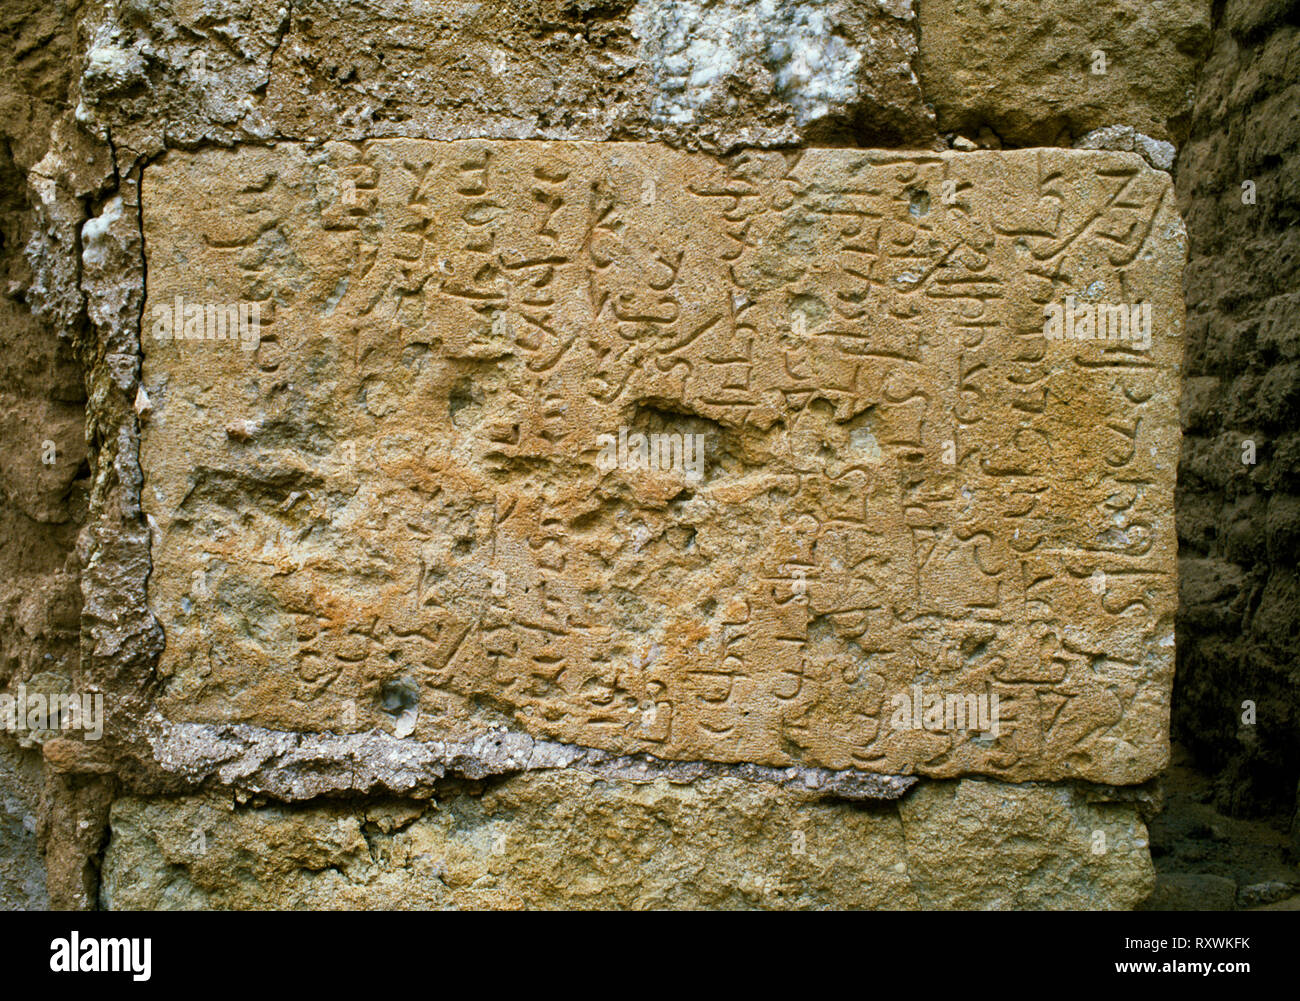 Hatra (al-Hadr), Iraq: a limestone block at the northern gate inscribed in Aramaic, the written language of the Arab rulers of the C1stBC caravan city Stock Photo